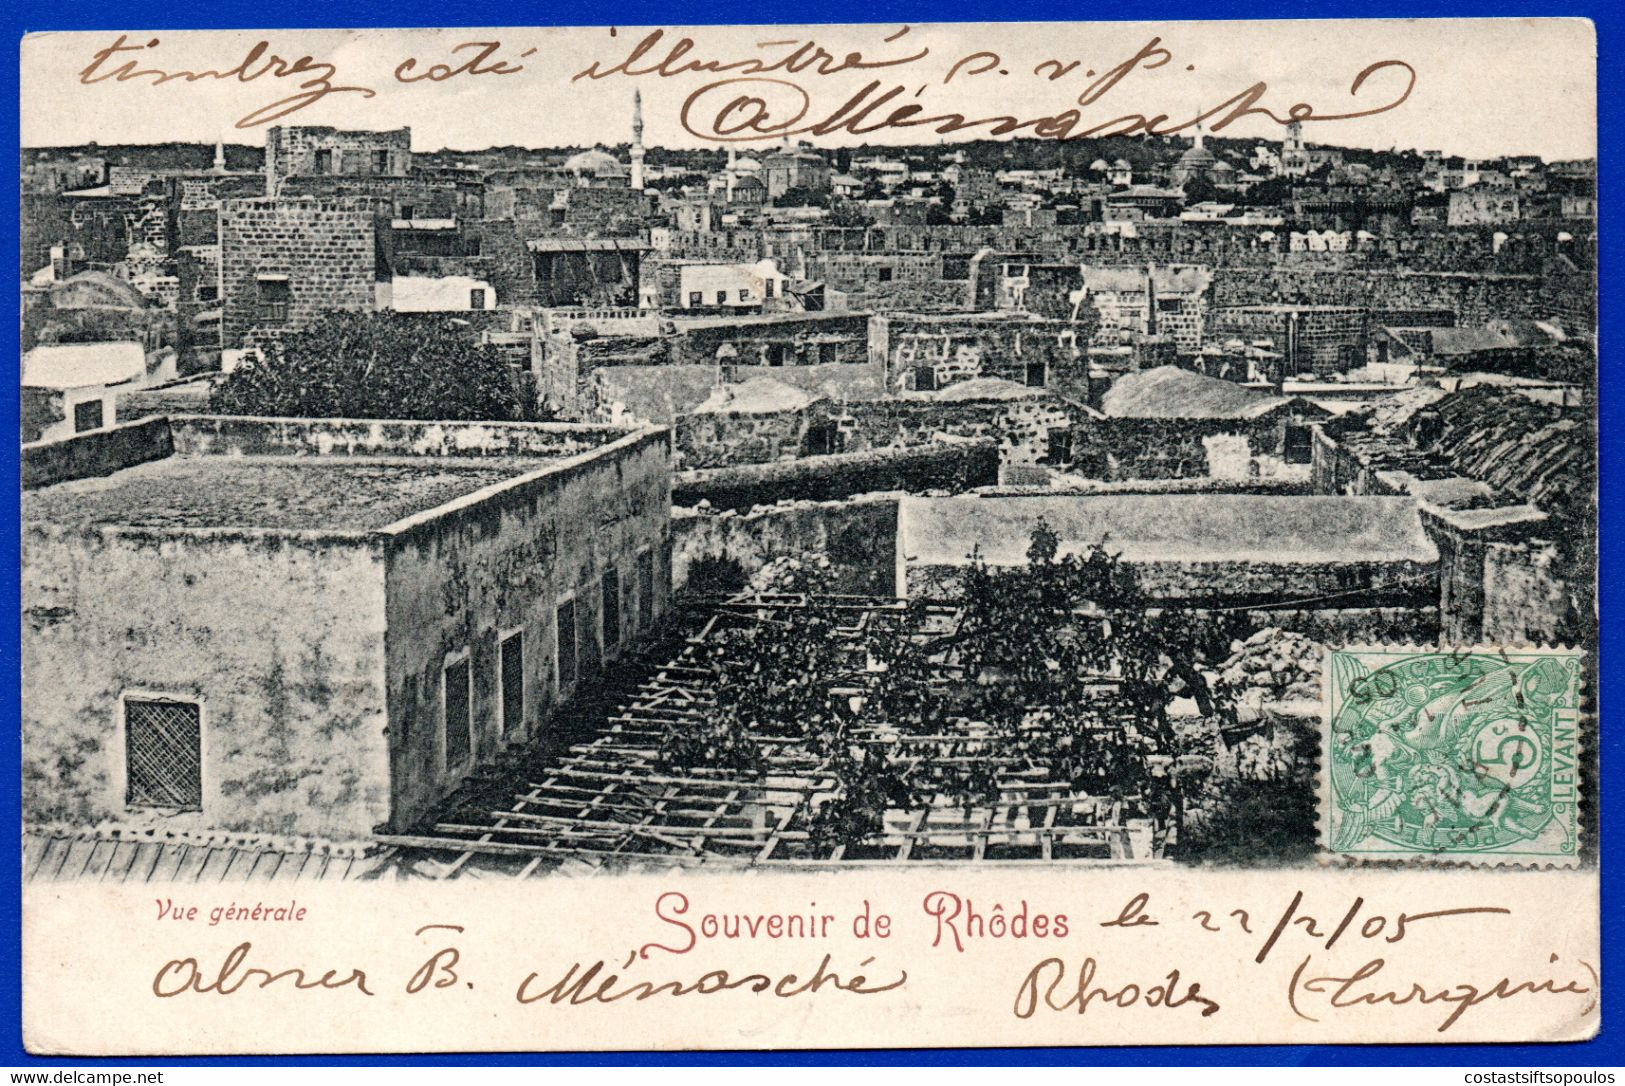 1403.GREECE, DODECANESE, FRANCE, LEVANT. 1905 REAL PHOTO POSTCARD FROM RHODES TO BELGIUM - Dodekanisos